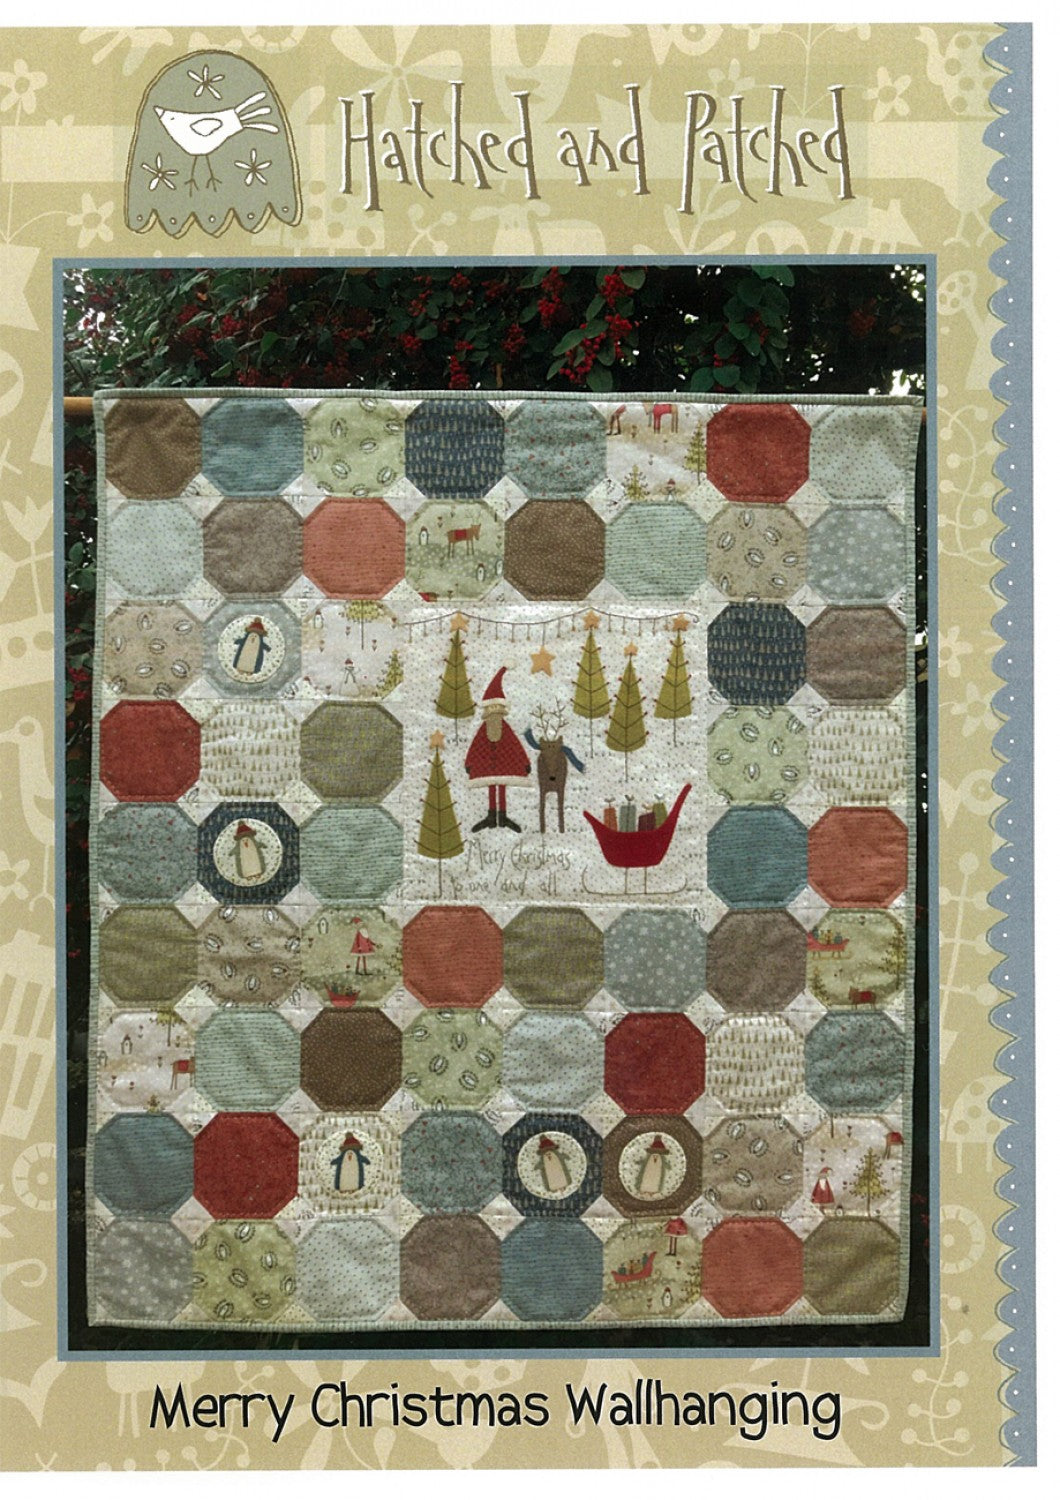 HATCHED AND PATCHED -  MERRY CHRISTMAS WALLHANGING - Quilt pattern